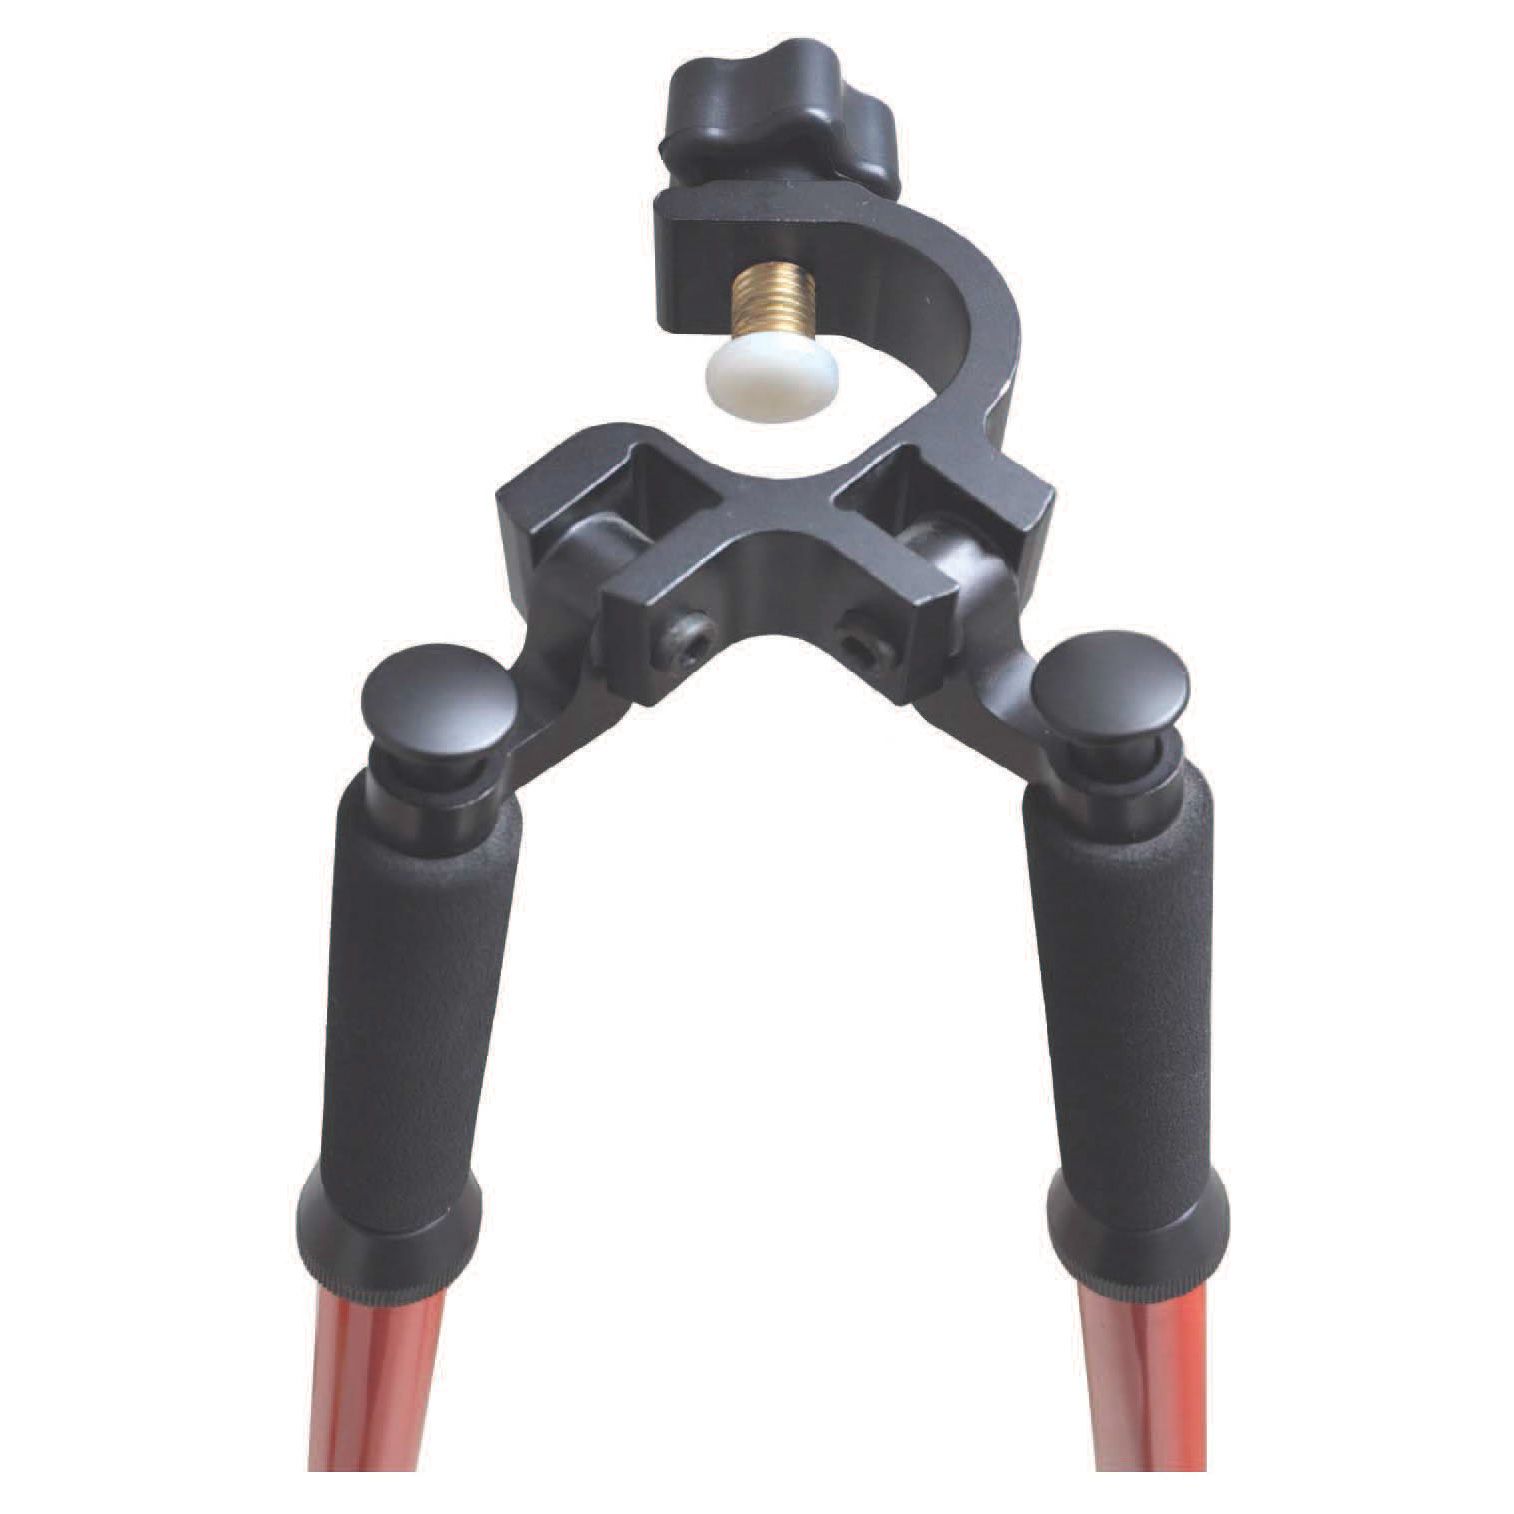 CLS22 Bipod for Prism Poles - Red